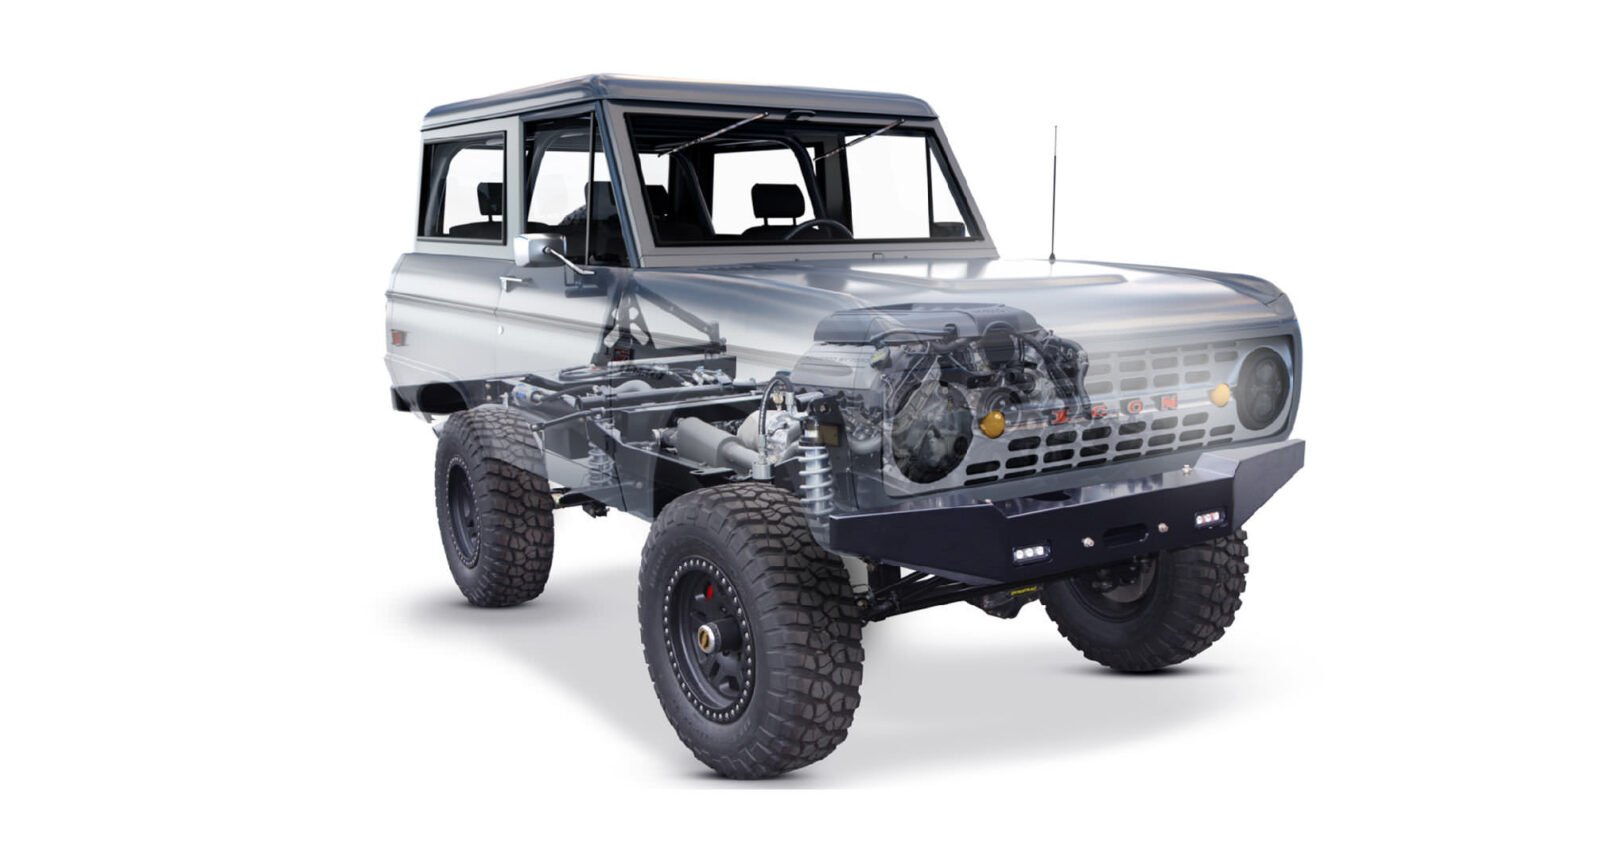 First Generation Ford Bronco - The Essential Buying Guide